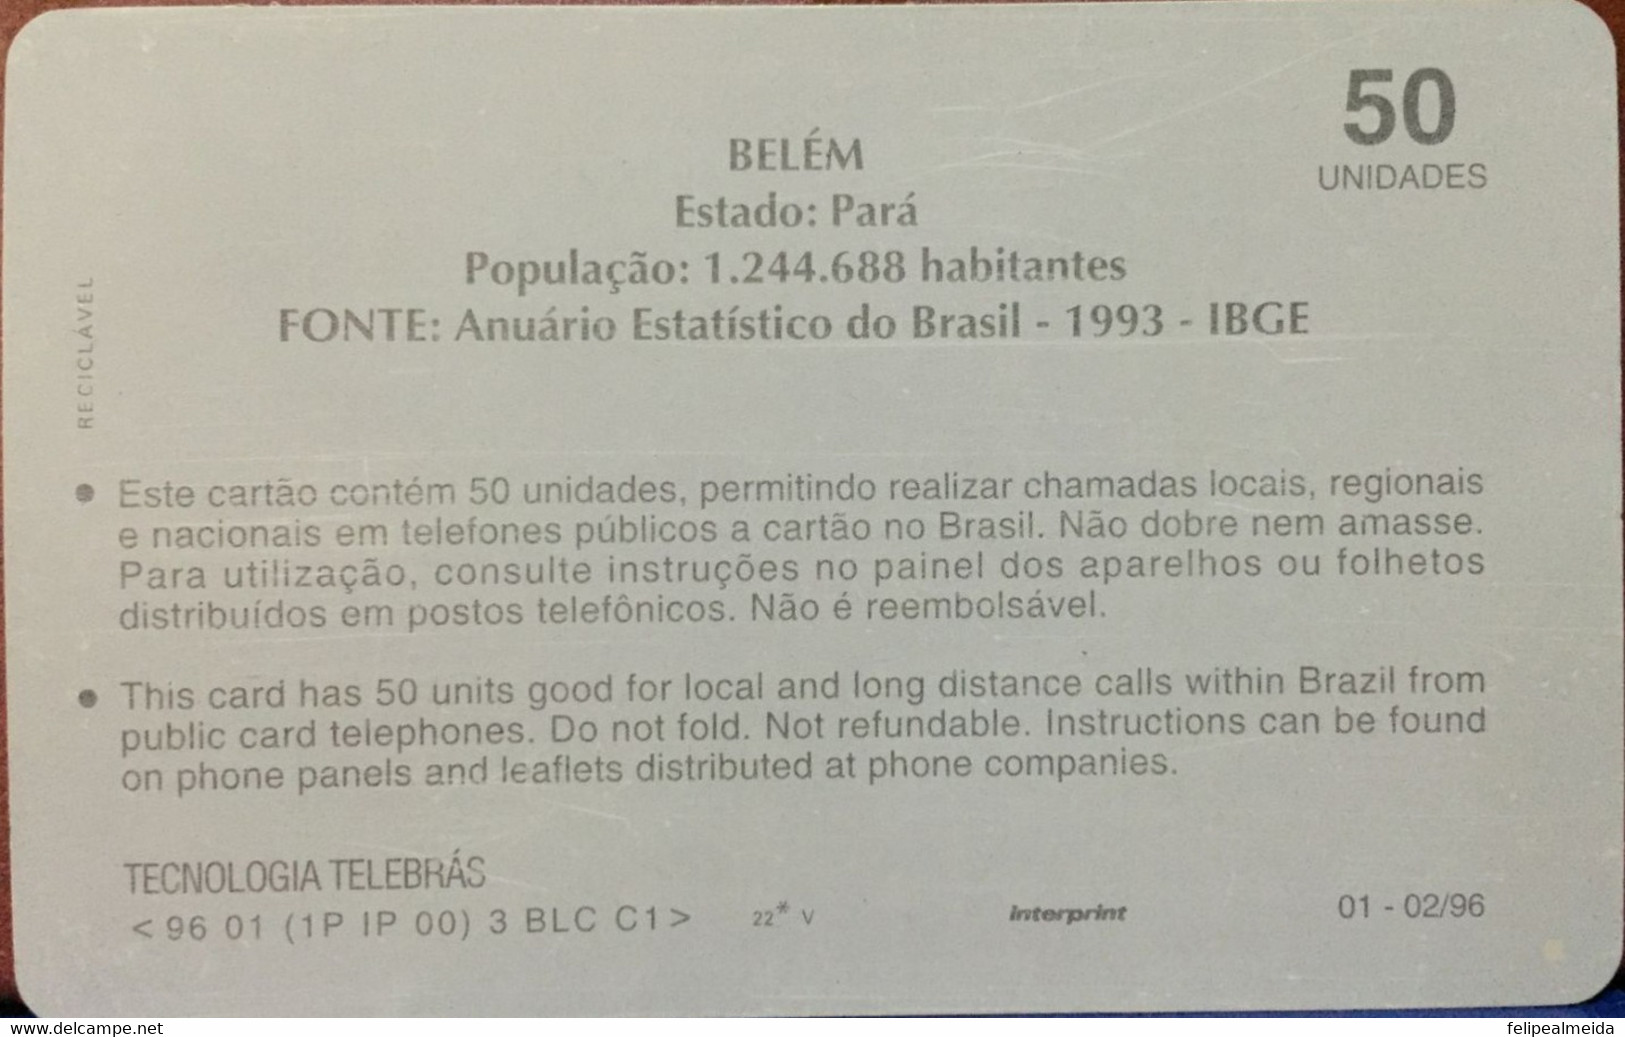 Phone Card Manufactured By Telebras In 1996 - Photo Belem Do Pará - Pará - Brazil - Statistical Yearbook Of Brazil 1993 - Cultura